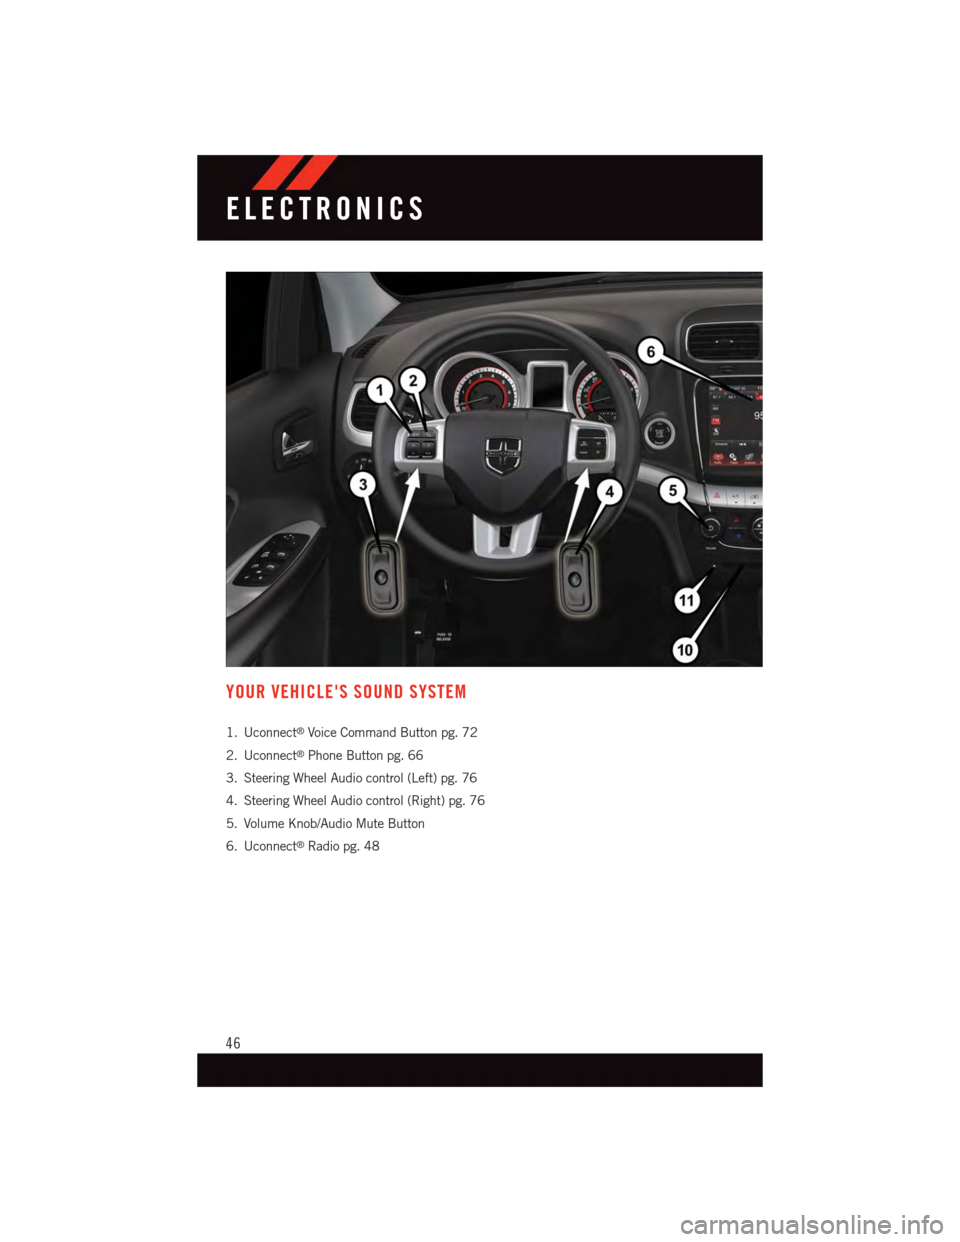 DODGE JOURNEY 2015 1.G User Guide YOUR VEHICLES SOUND SYSTEM
1. Uconnect®Voice Command Button pg. 72
2. Uconnect®Phone Button pg. 66
3. Steering Wheel Audio control (Left) pg. 76
4. Steering Wheel Audio control (Right) pg. 76
5. Vo